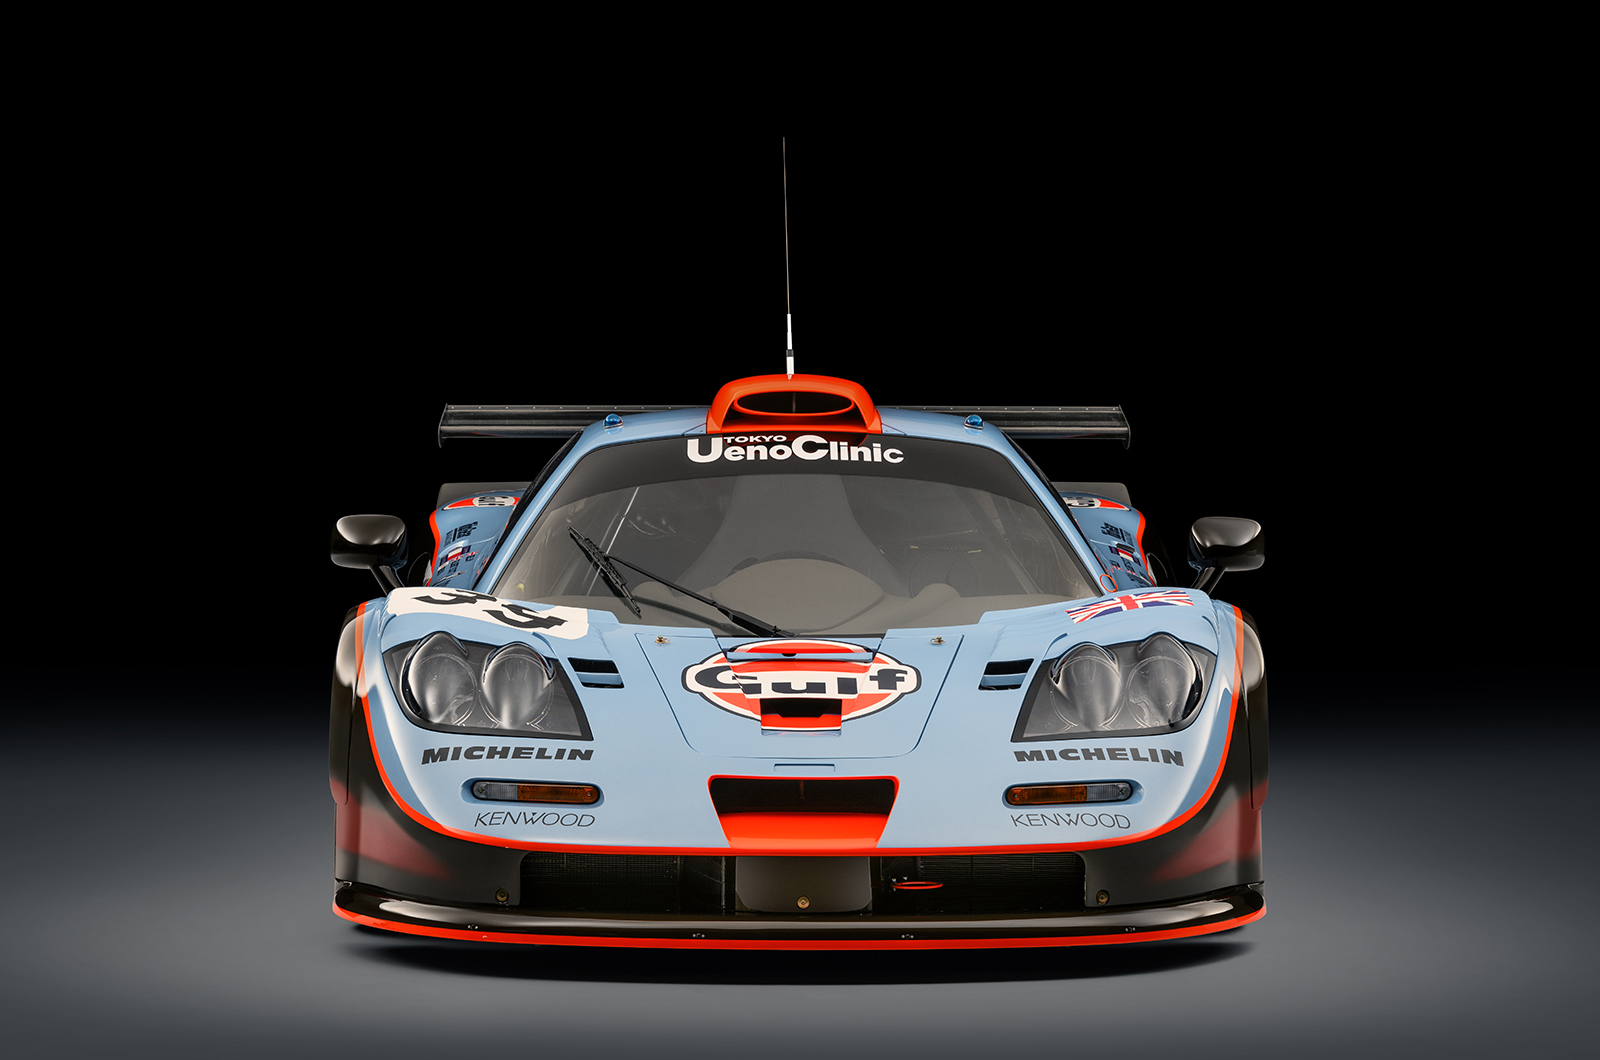 Classic & Sports Car – Certification service launched for McLaren F1s